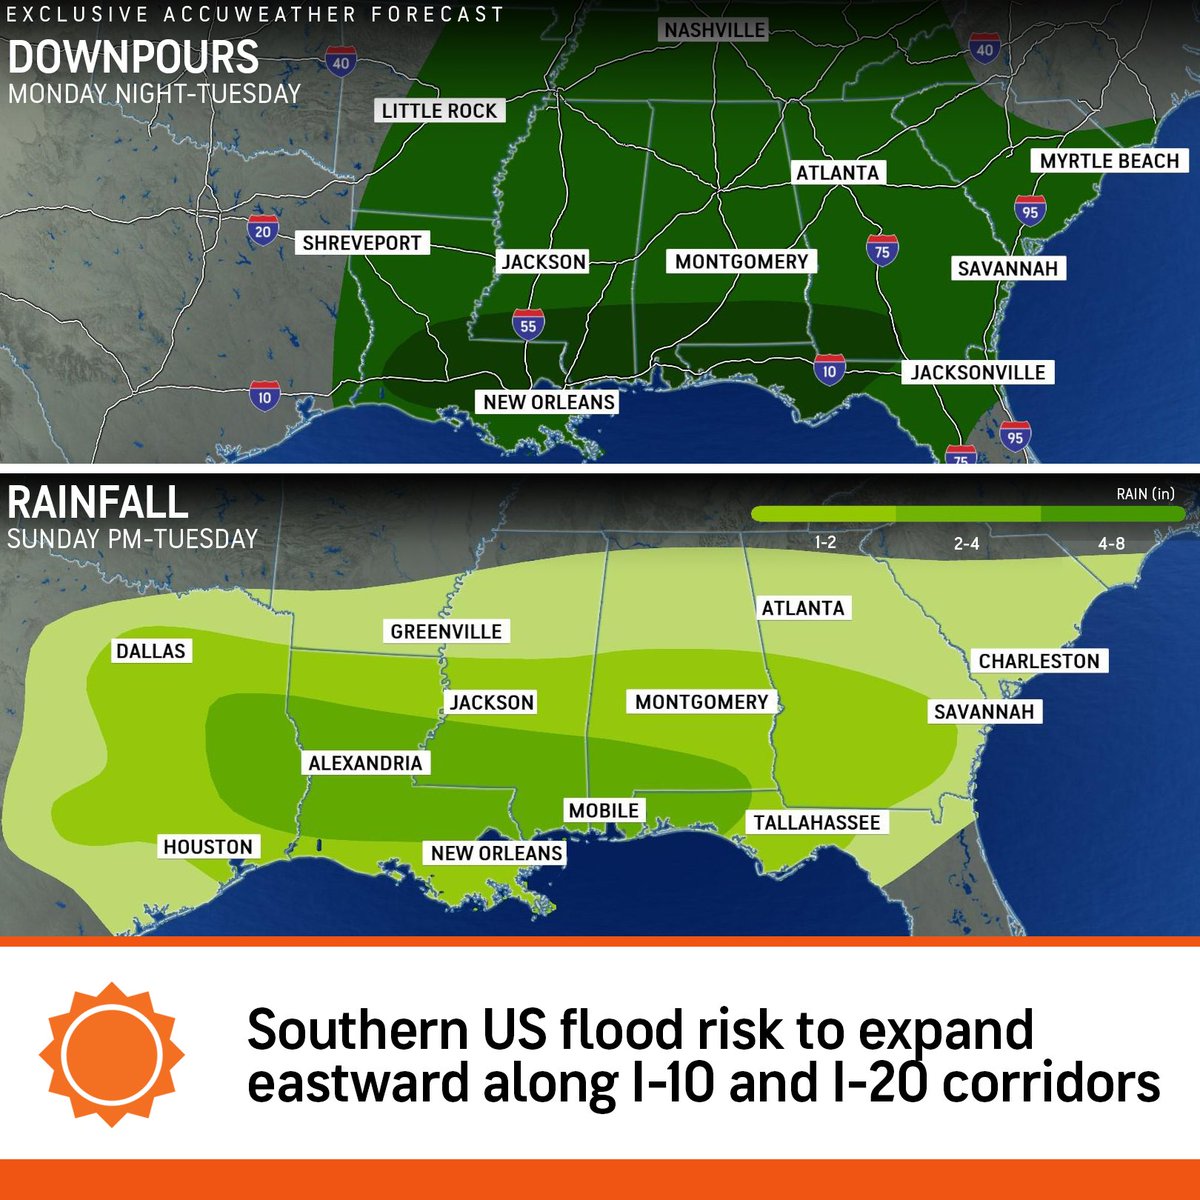 A foot of rain is possible in parts of the Gulf Coast states as a stormy pattern unloads rounds of heavy rain across the region throughout the week. bit.ly/3V0PoDX